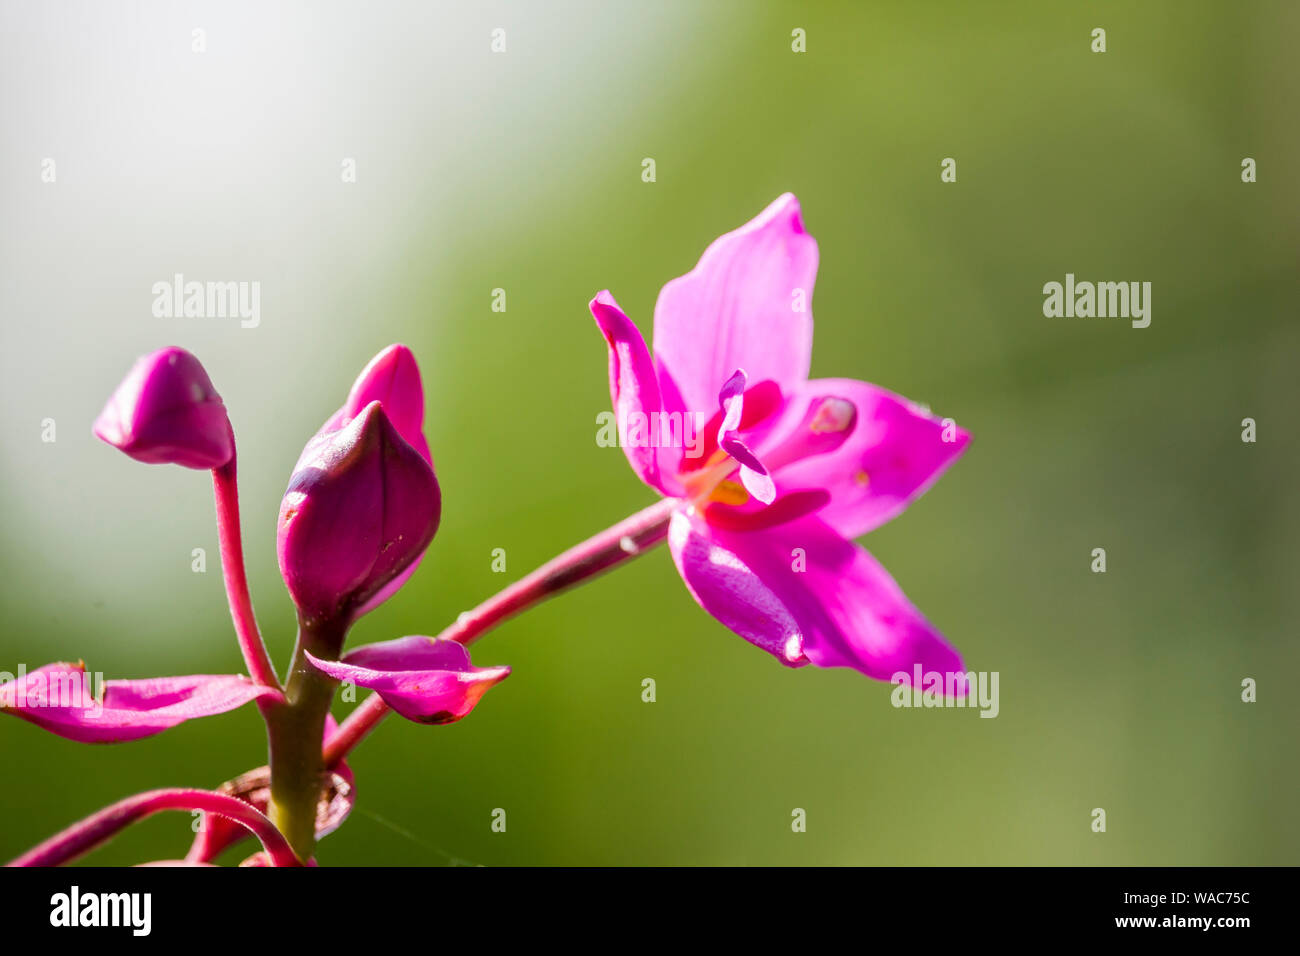 Beautiful Small Pink color Flower Stock Photo